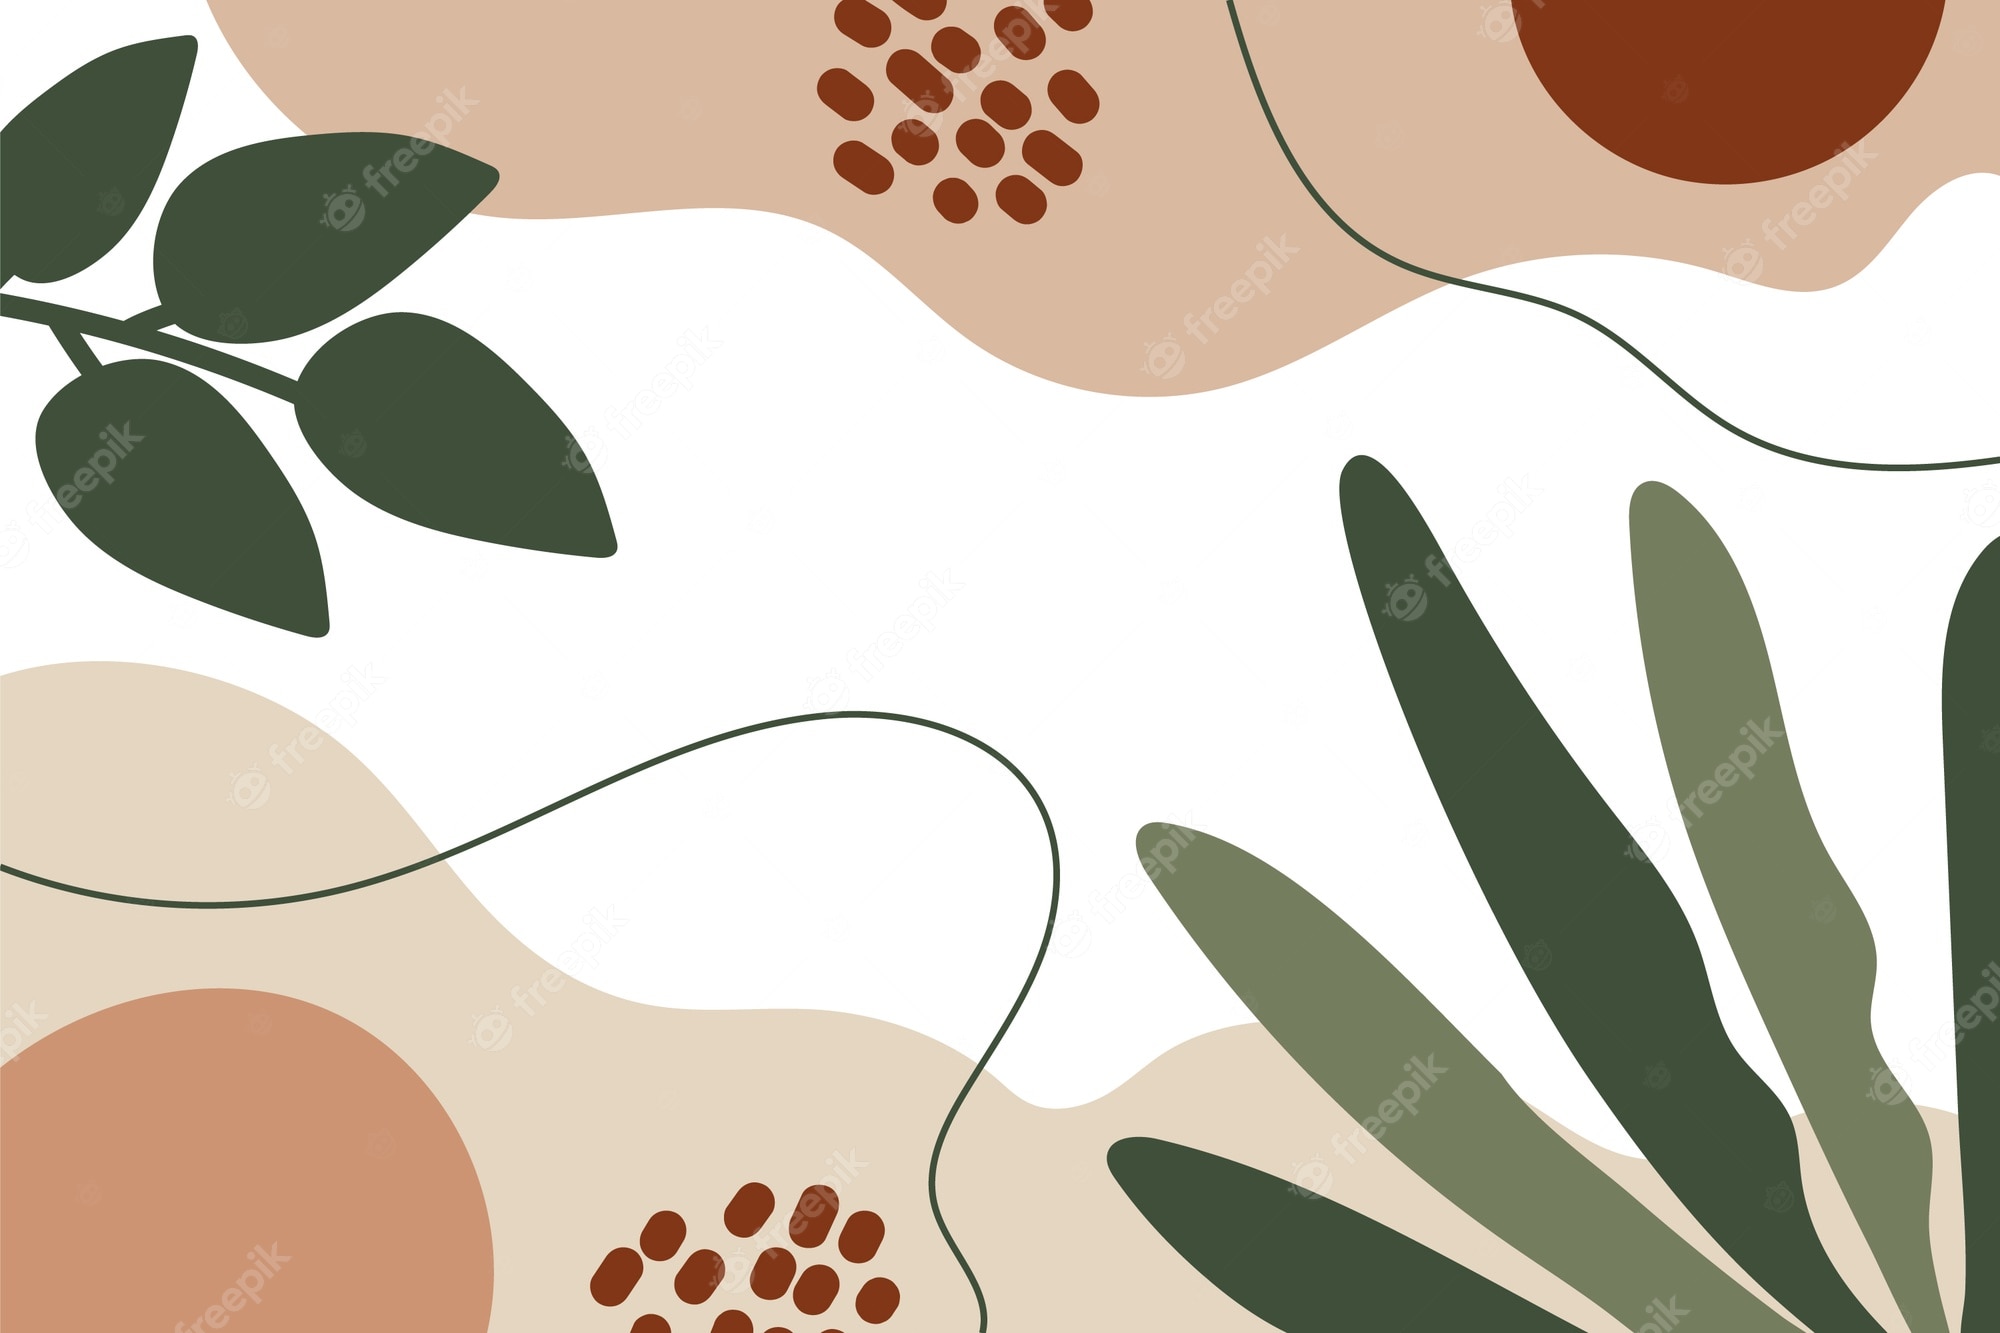 A background image with plant elements - Terracotta